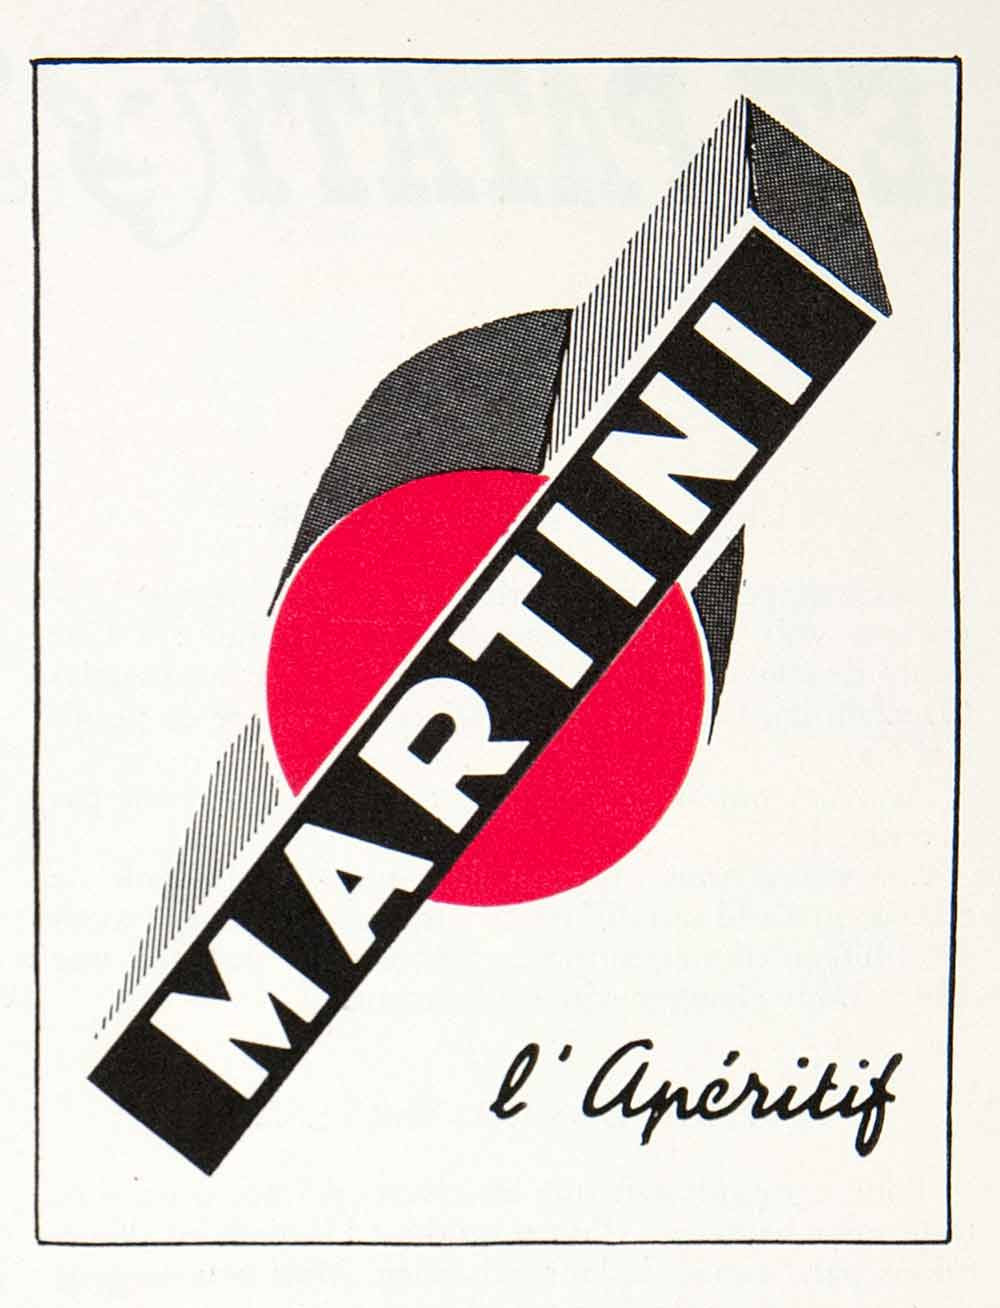 1955 Ad Martini Aperitif Alcohol Beverage Drink French Advertising VEN2